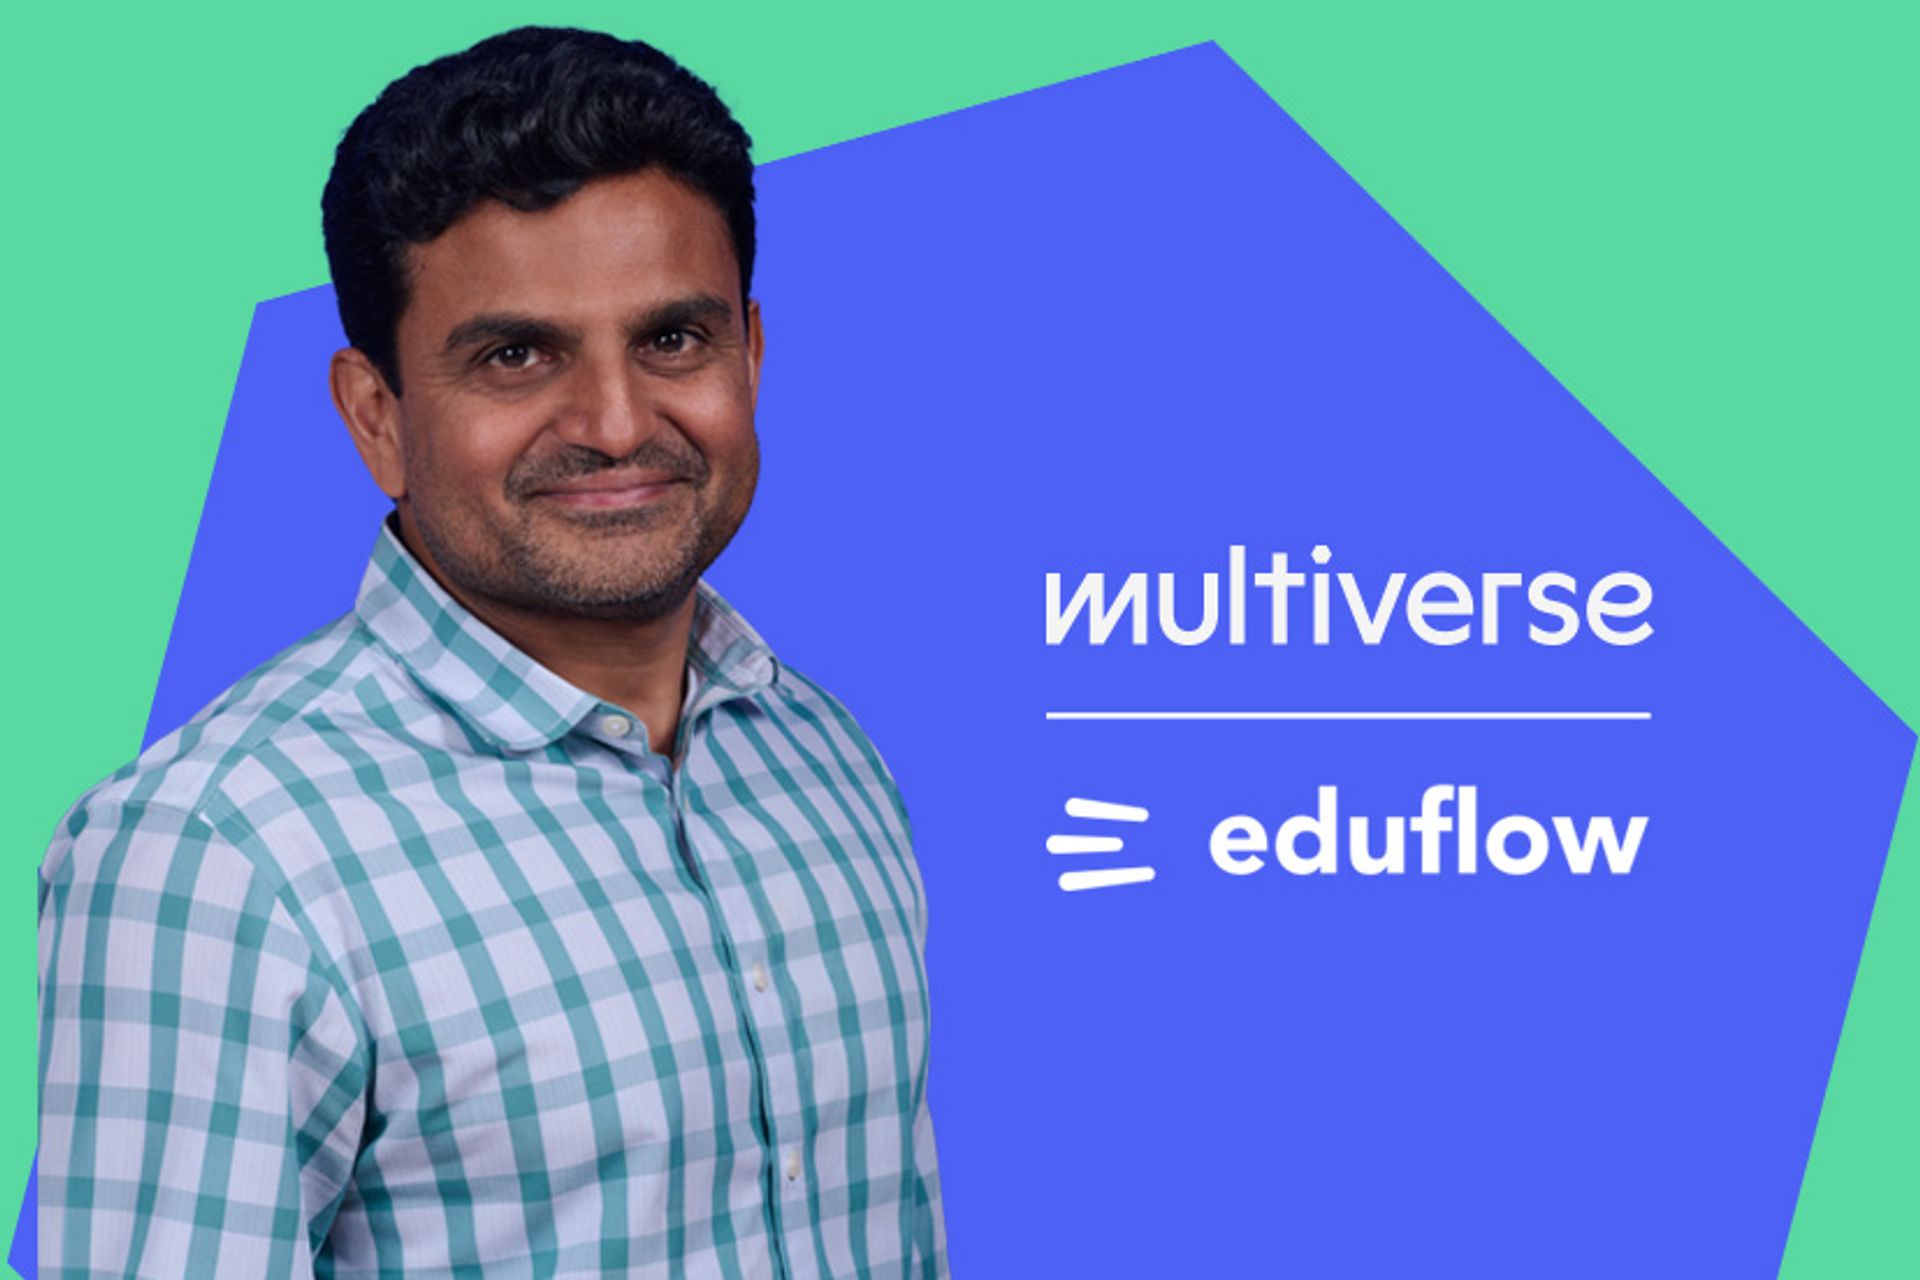 Our new CPTO, Ujjwal, alongside the Multiverse and Eduflow logos